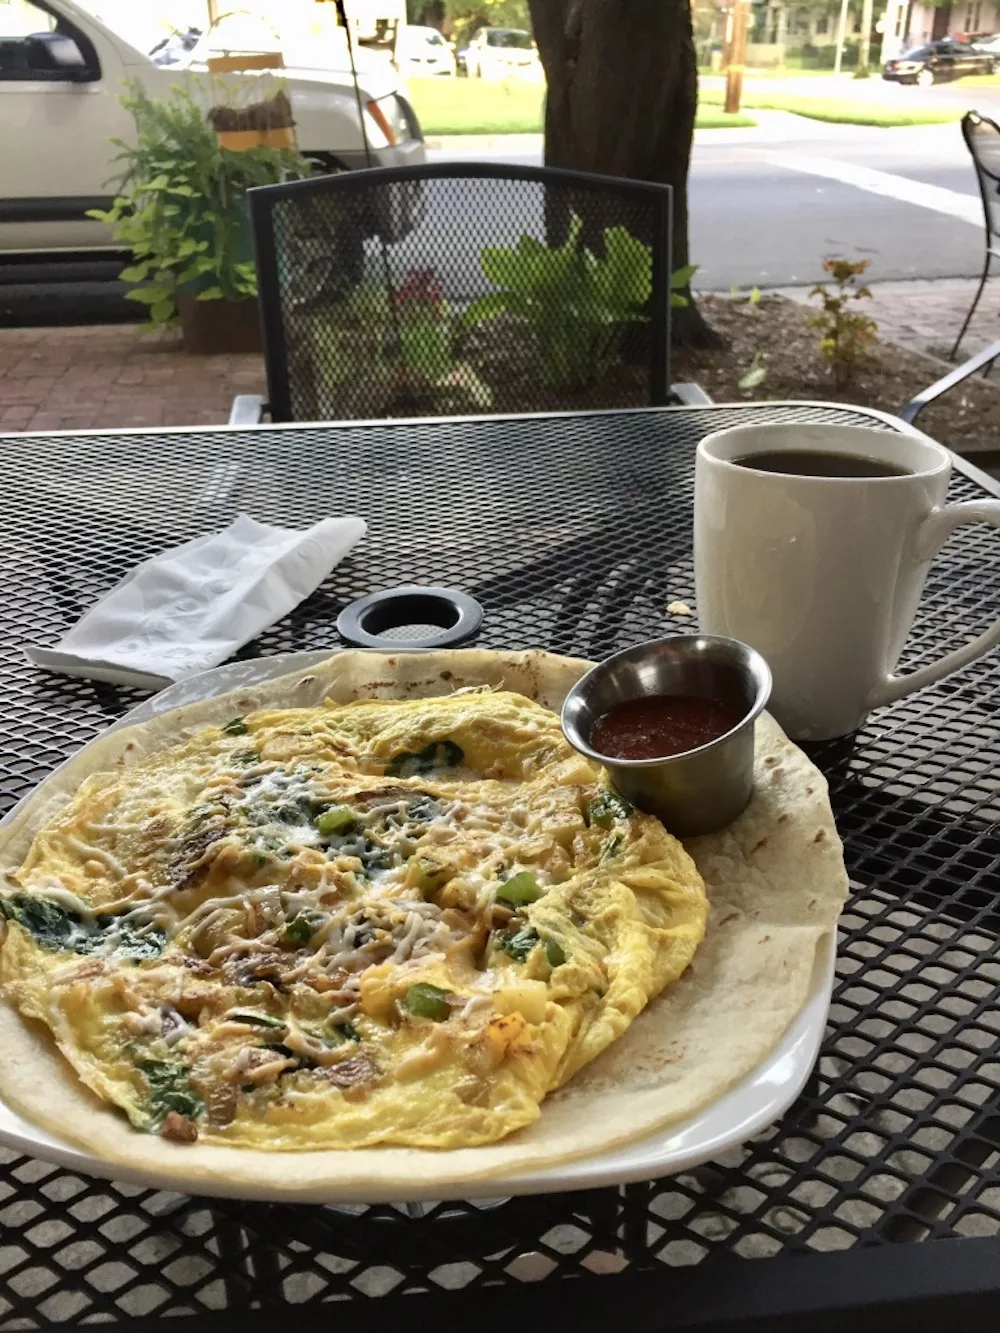 Veggie omelette with coffee on the patio of RCoffeehouse in Wichita, Kansas